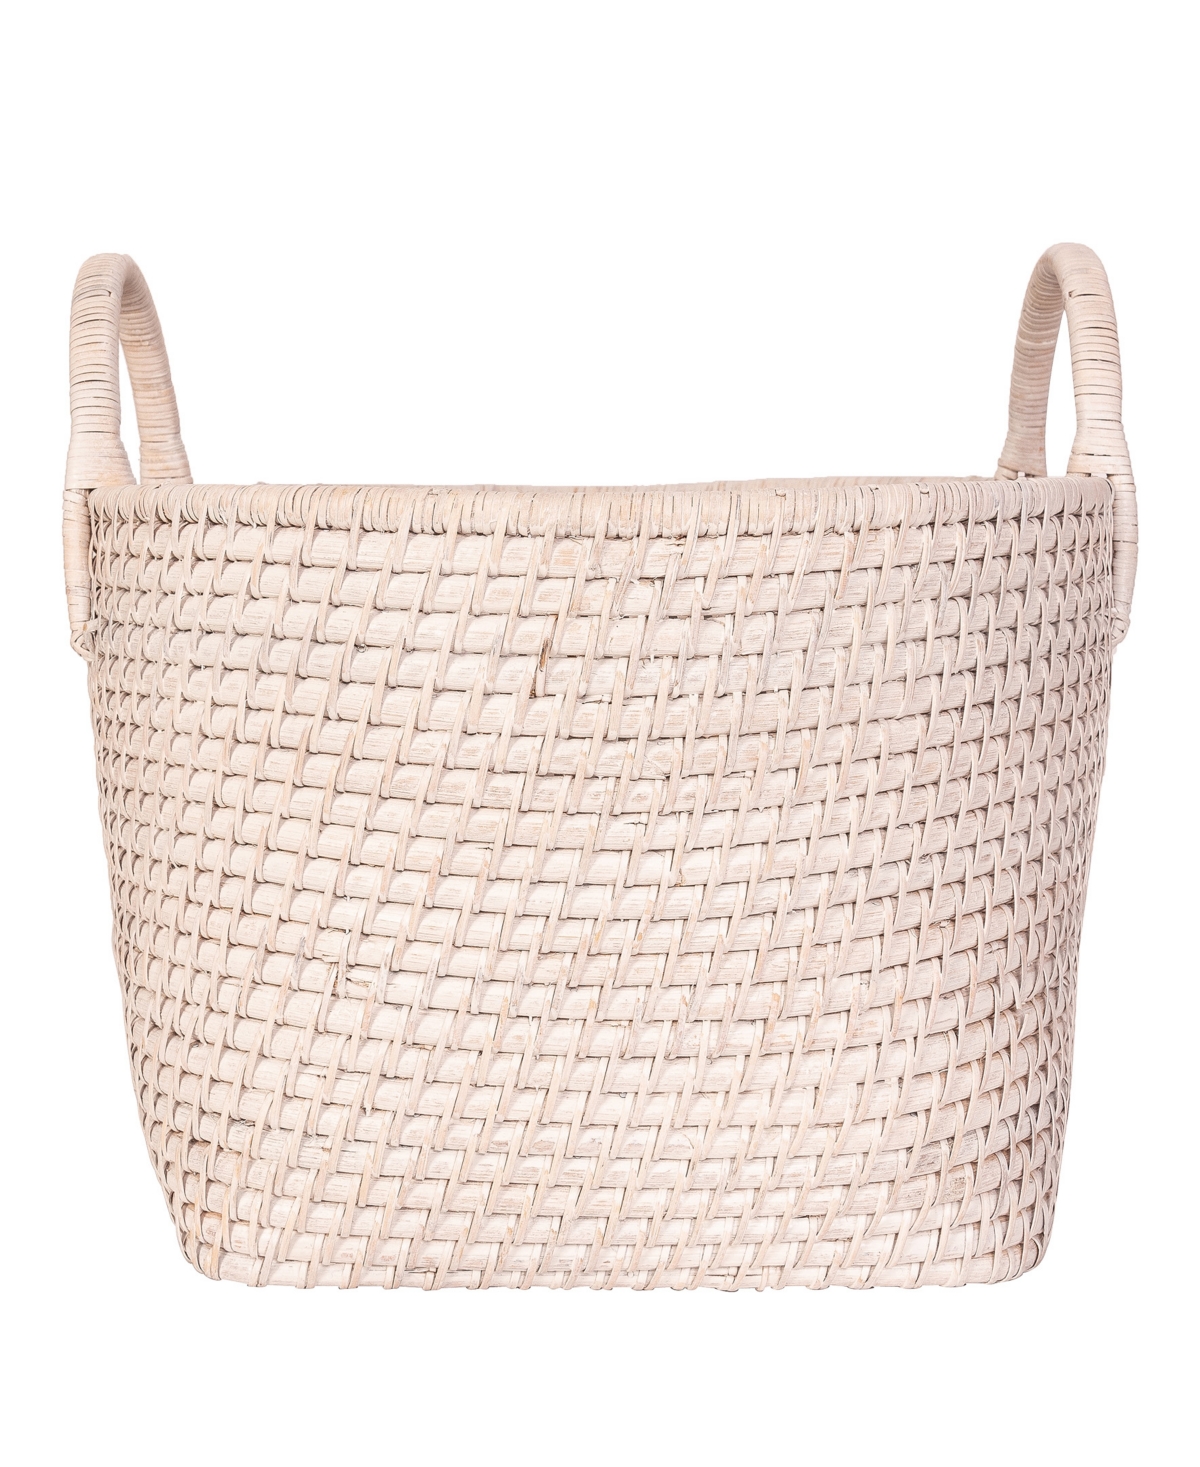 Shop Artifacts Trading Company Saboga Home Round Basket With Hoop Handles In White Wash